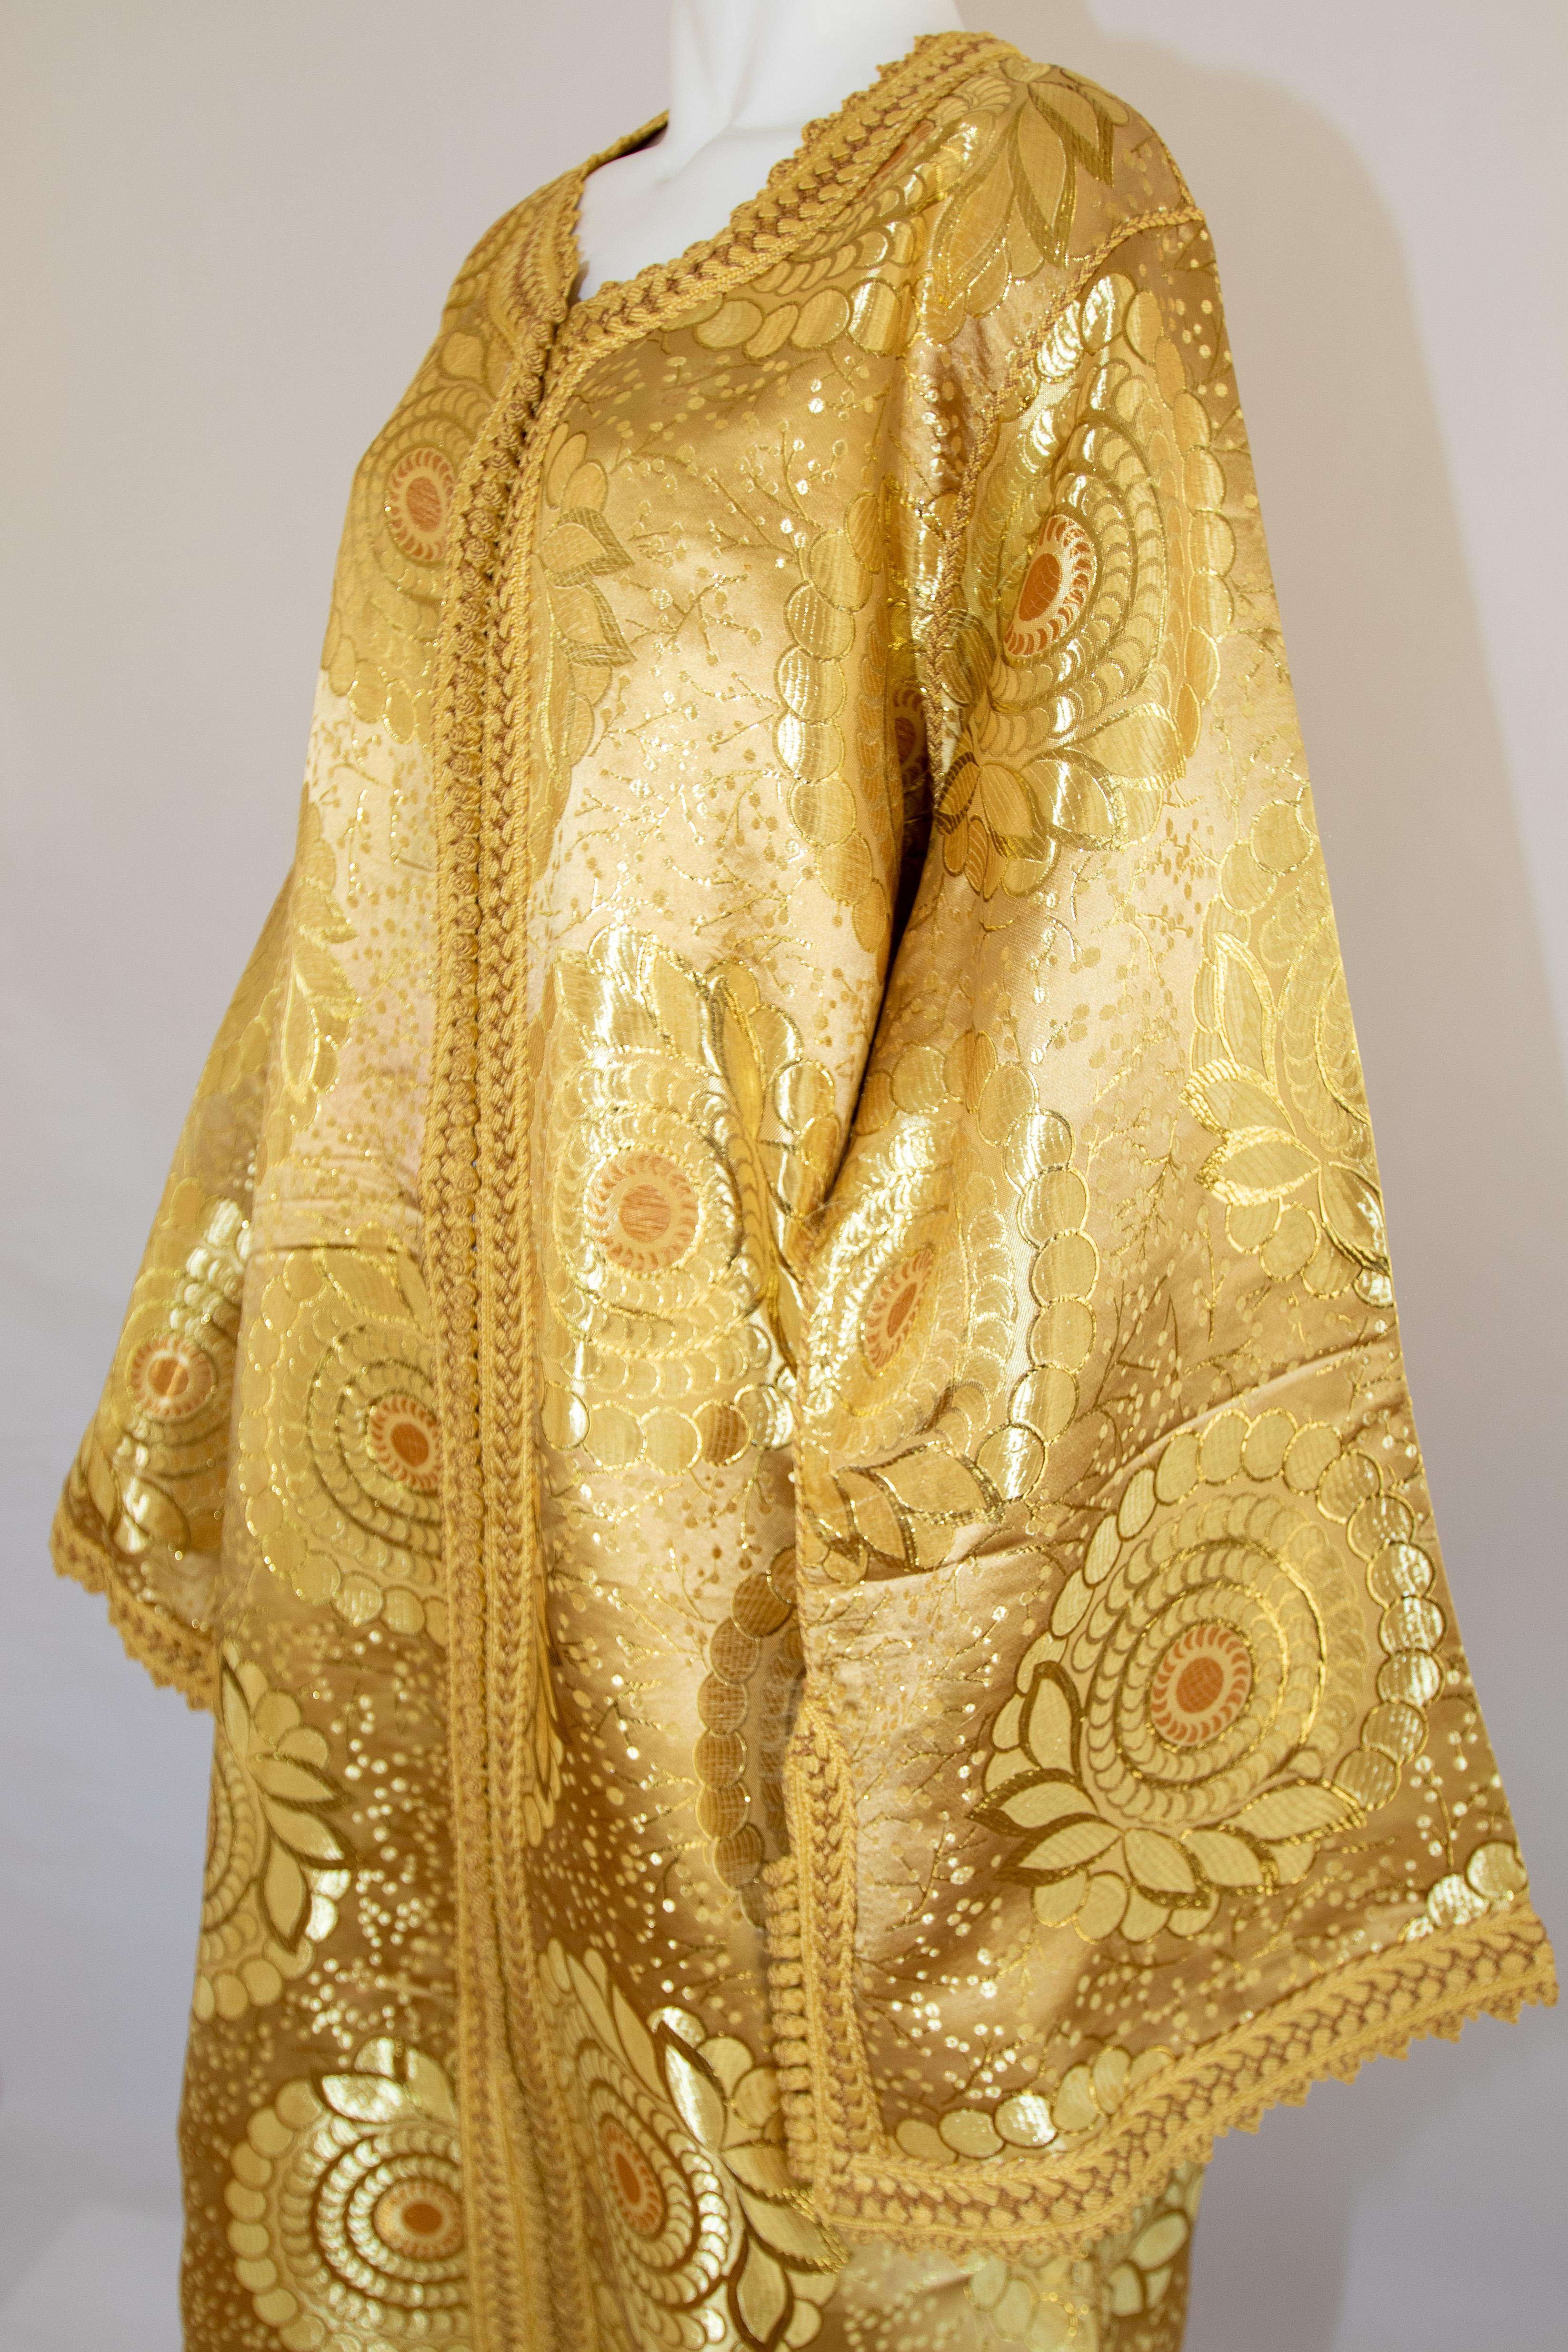 Women's or Men's Moroccan Vintage Caftan Gown in Gold Brocade Maxi Dress Kaftan Size L to XL For Sale